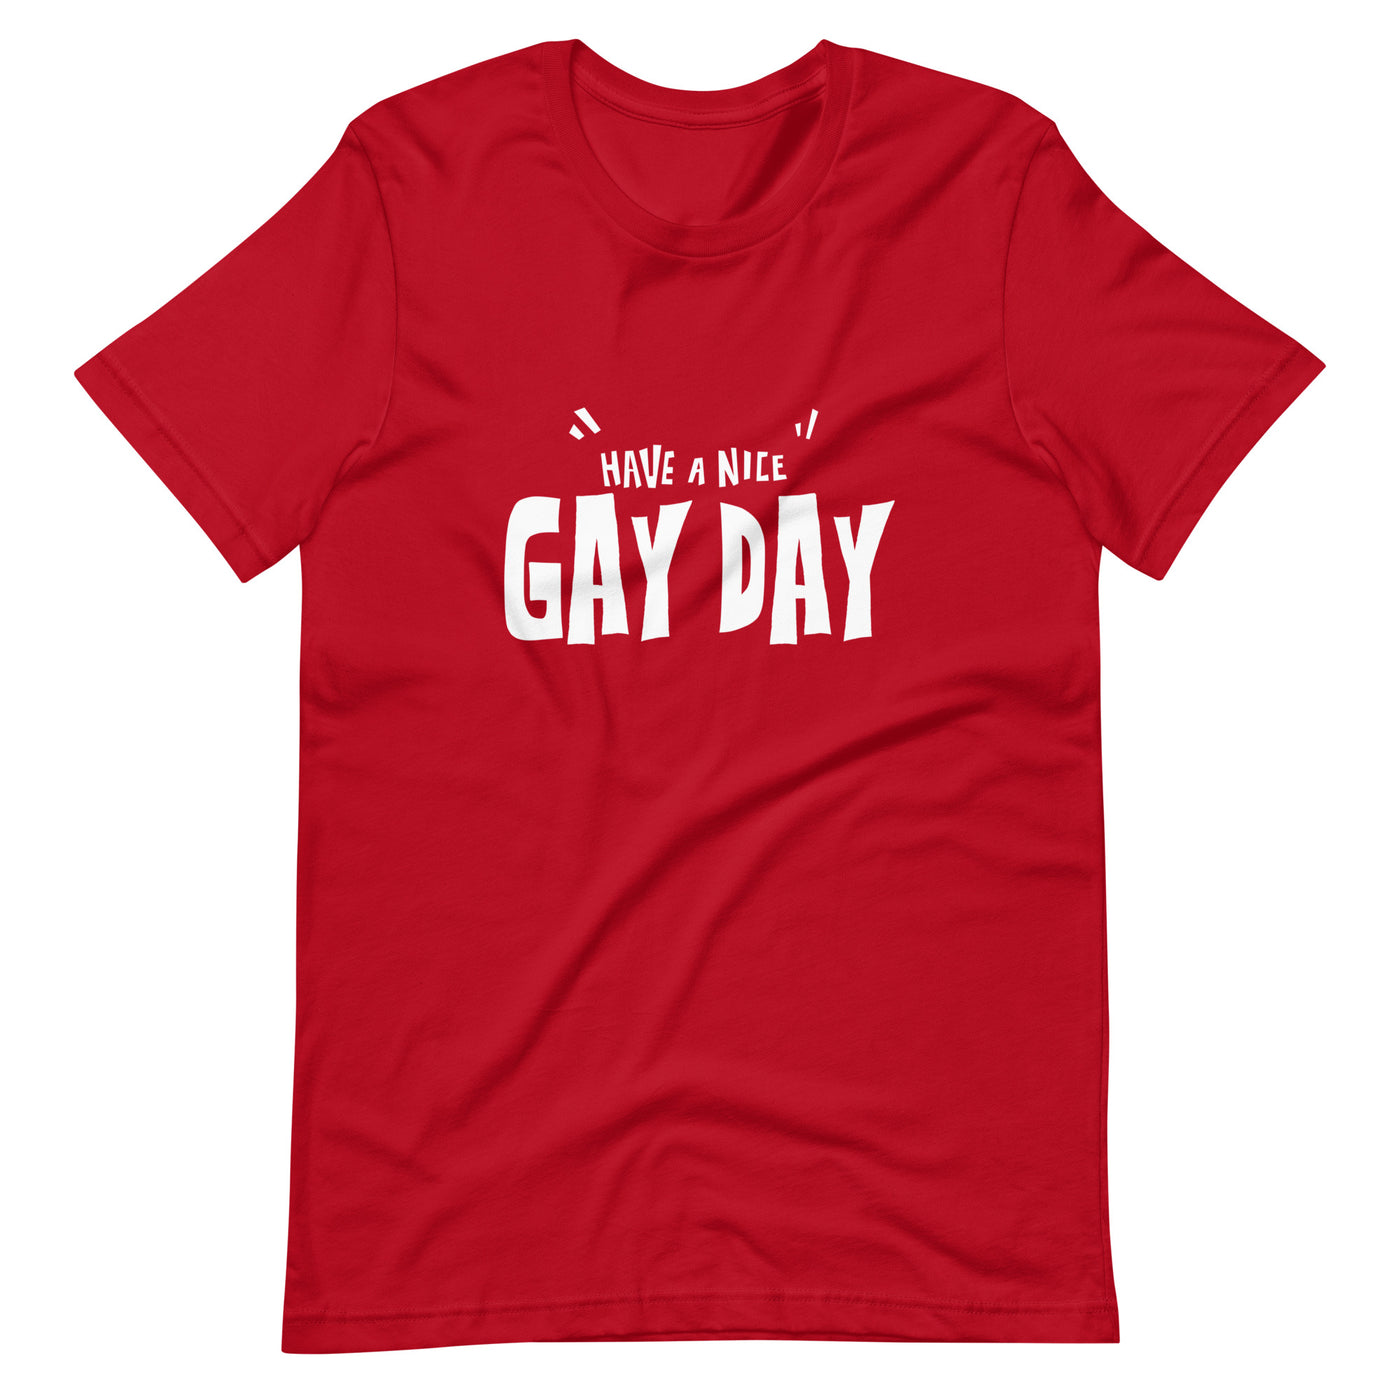 Pride Clothes - Live Out Loud Have a Nice Gay Day Pride Things TShirt - Red